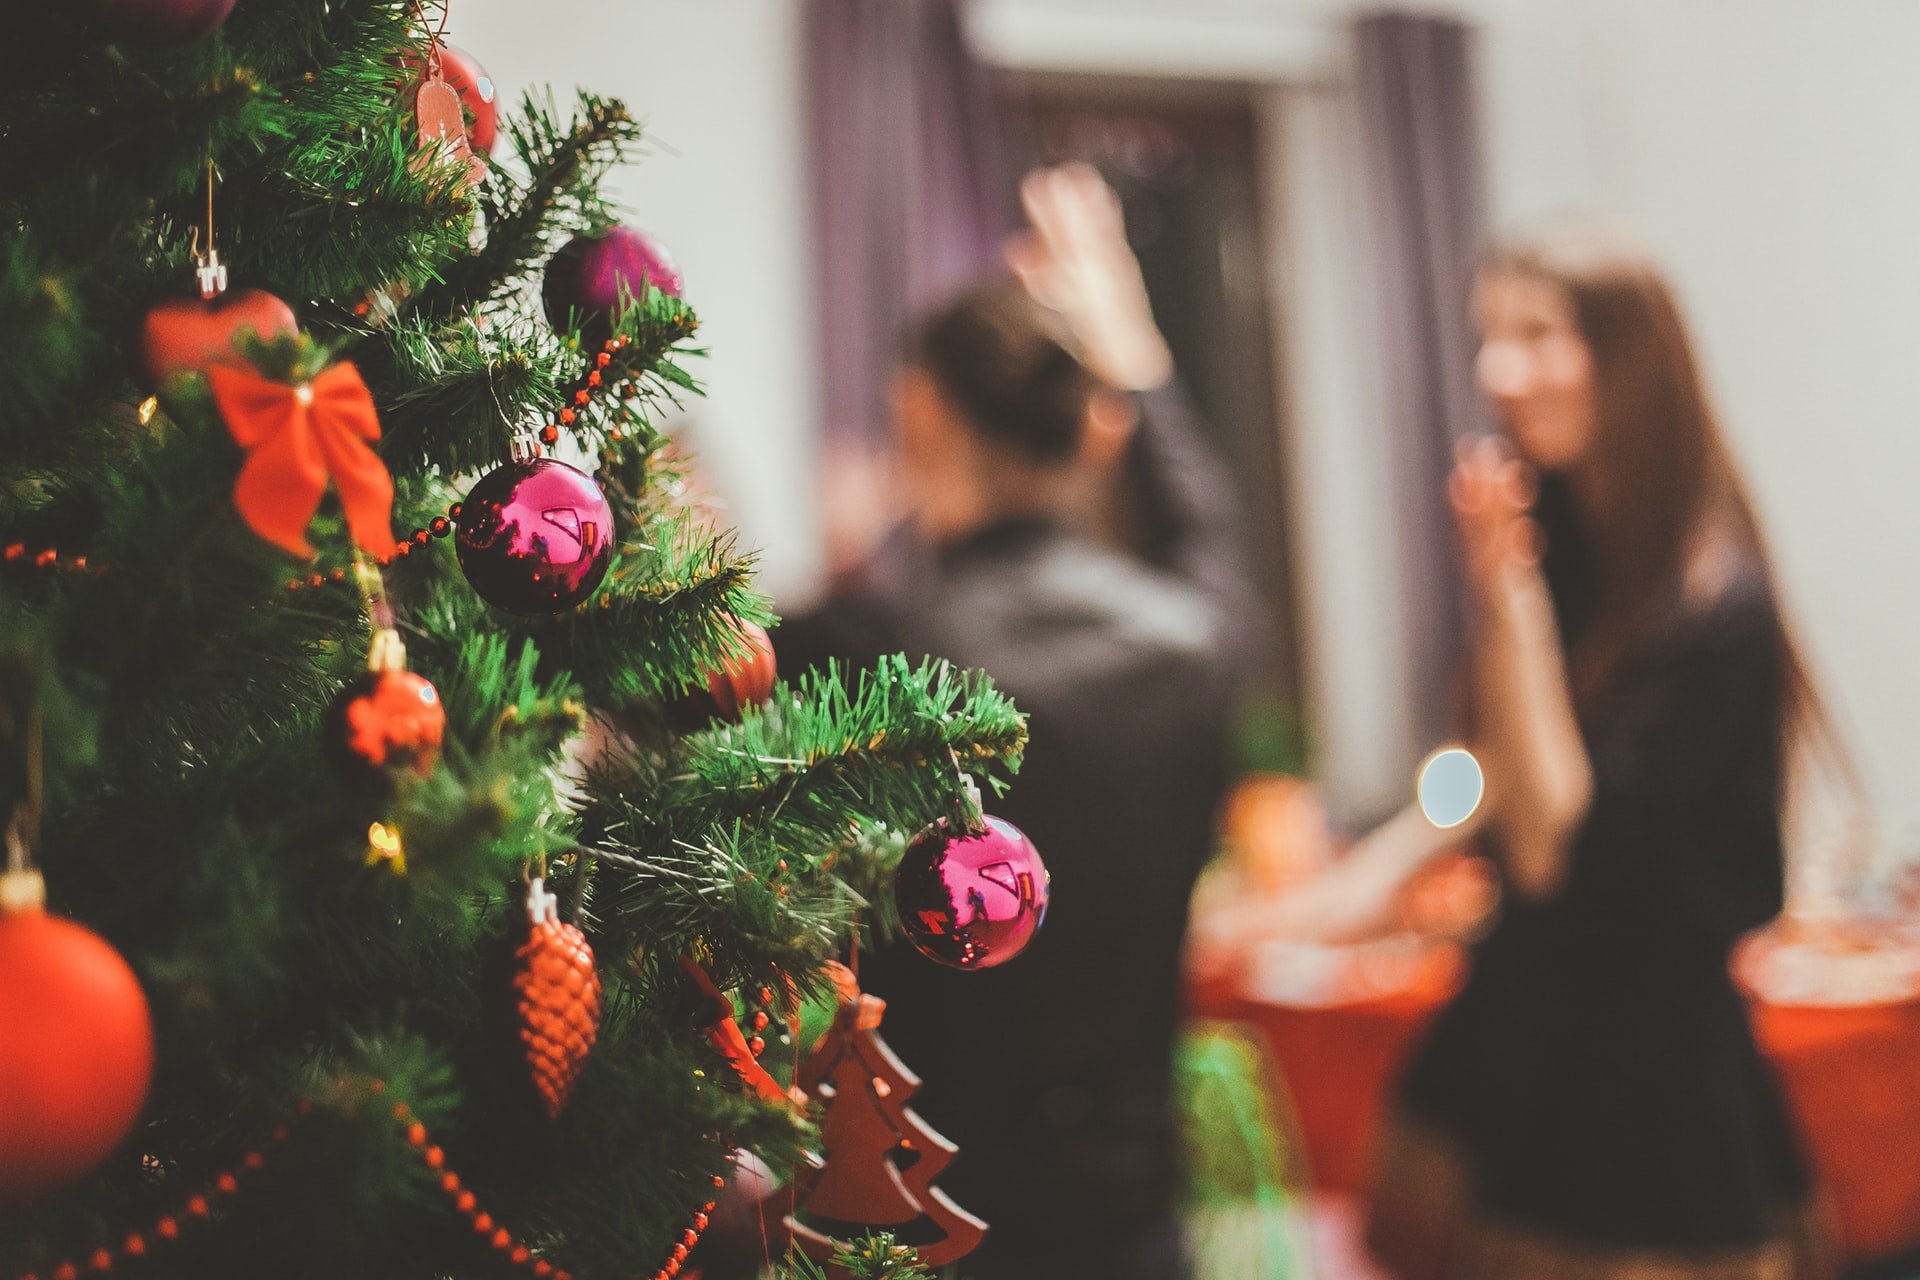 OP wanted to attend the Christmas party at home | Source: Unsplash